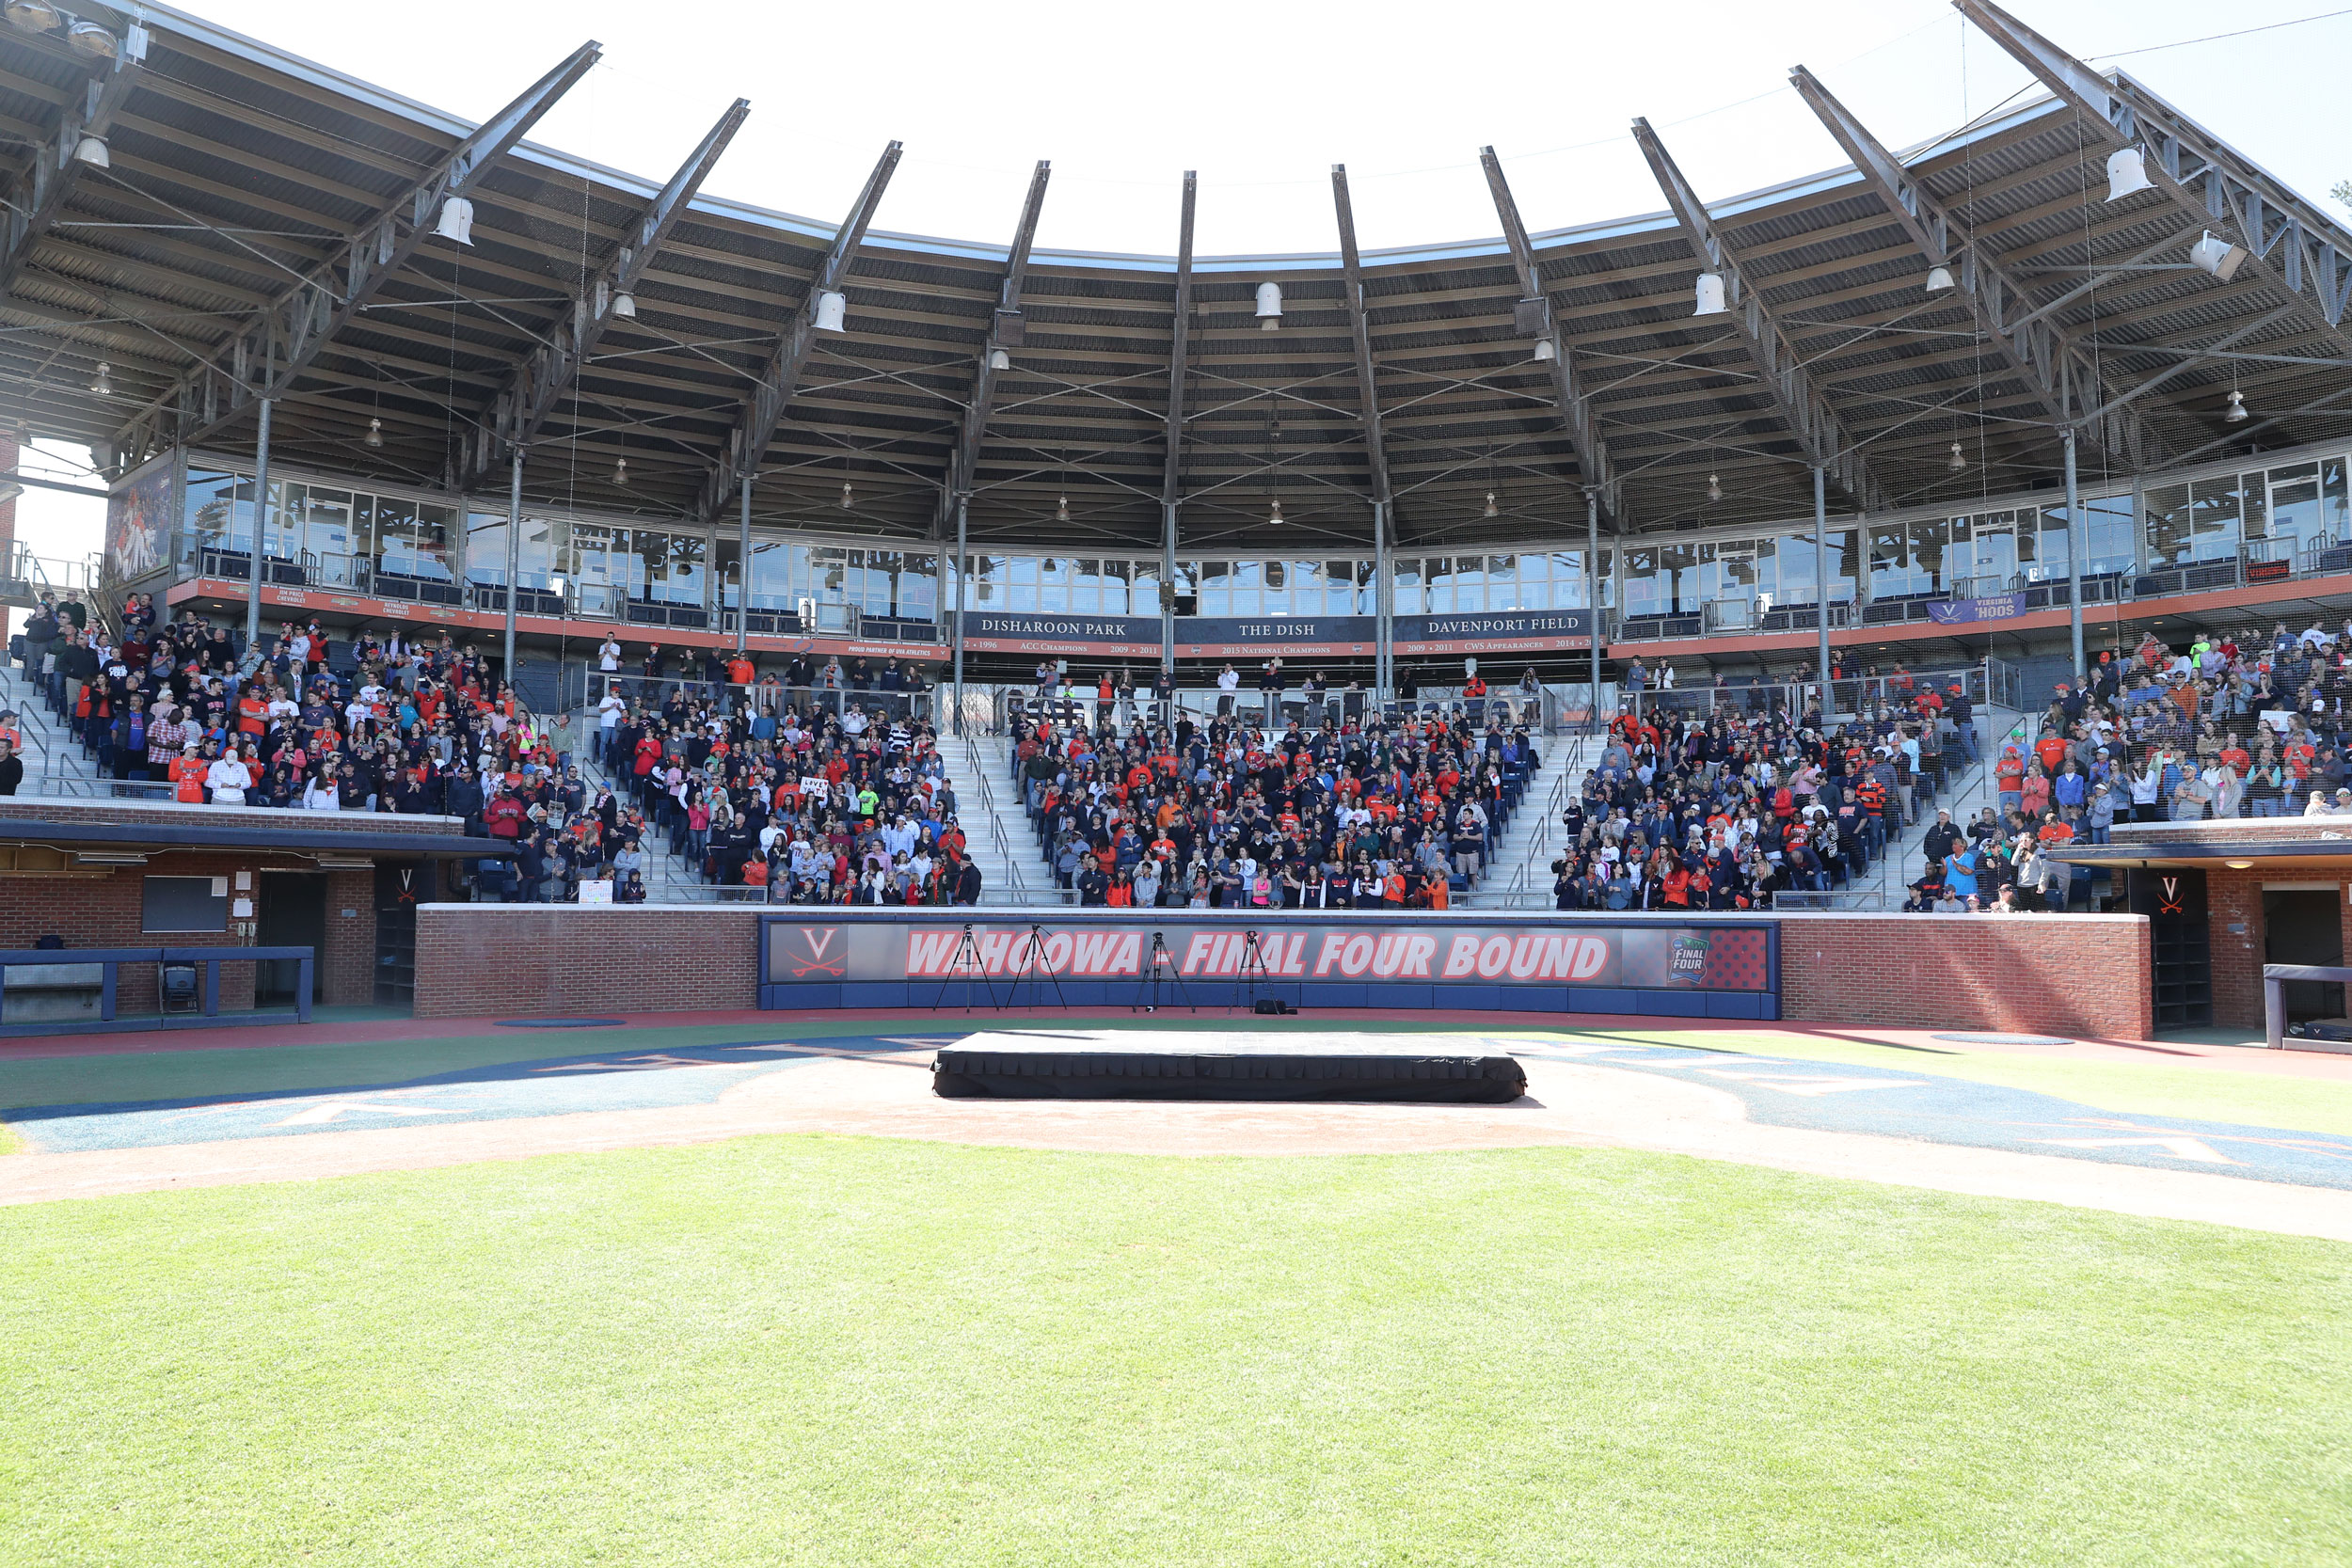 Crowd in the stands of the baseball stadium